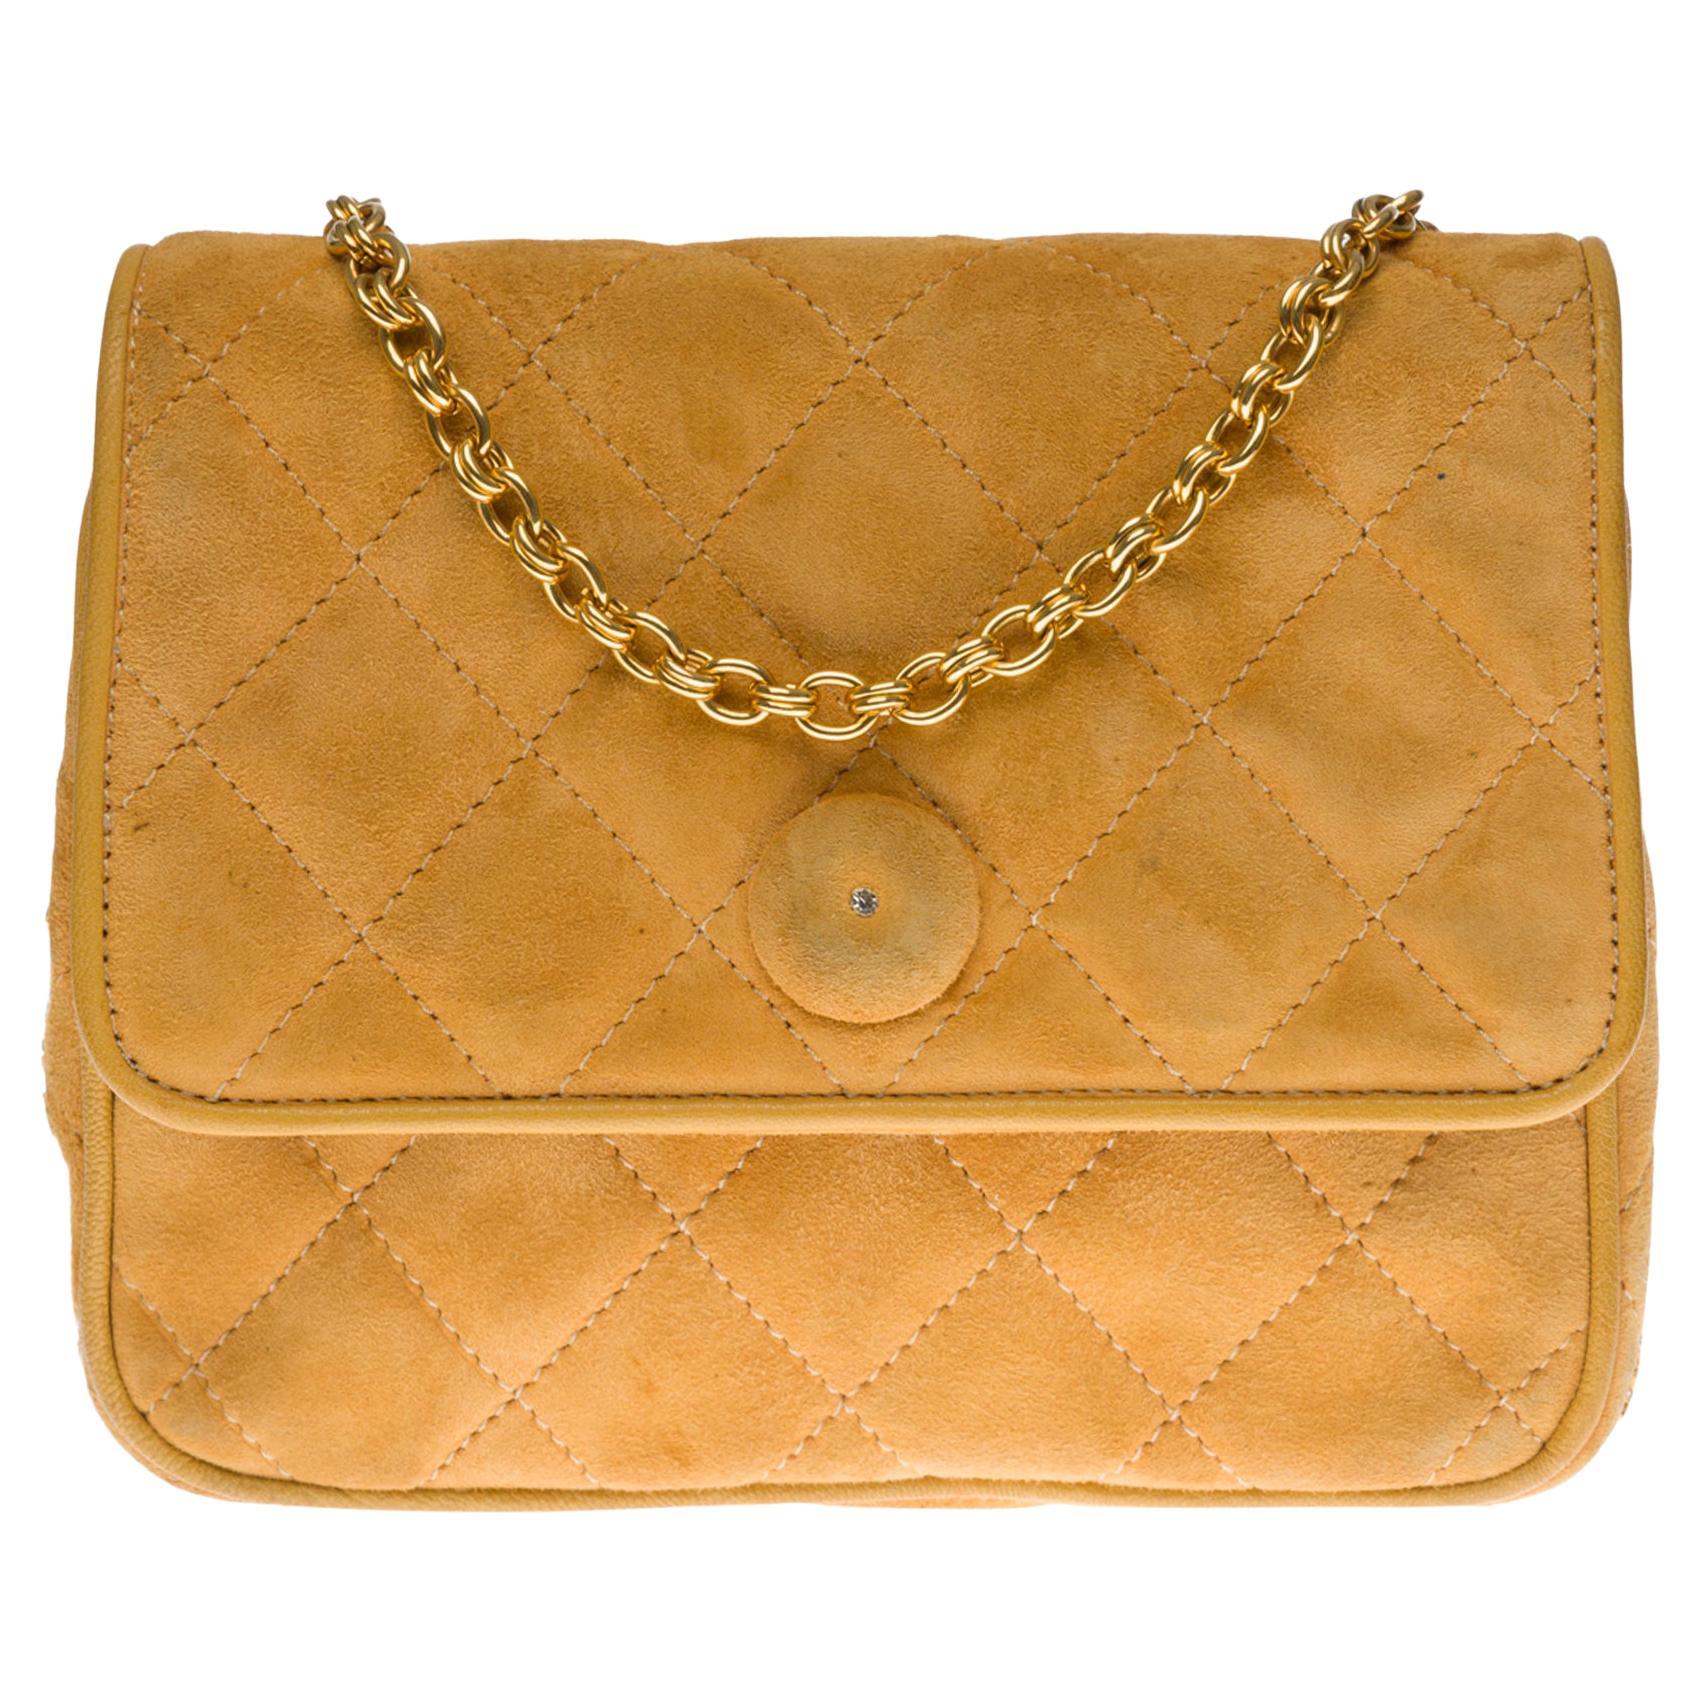 Chanel Classic Mini Shoulder Bag in beige quilted suede, GHW